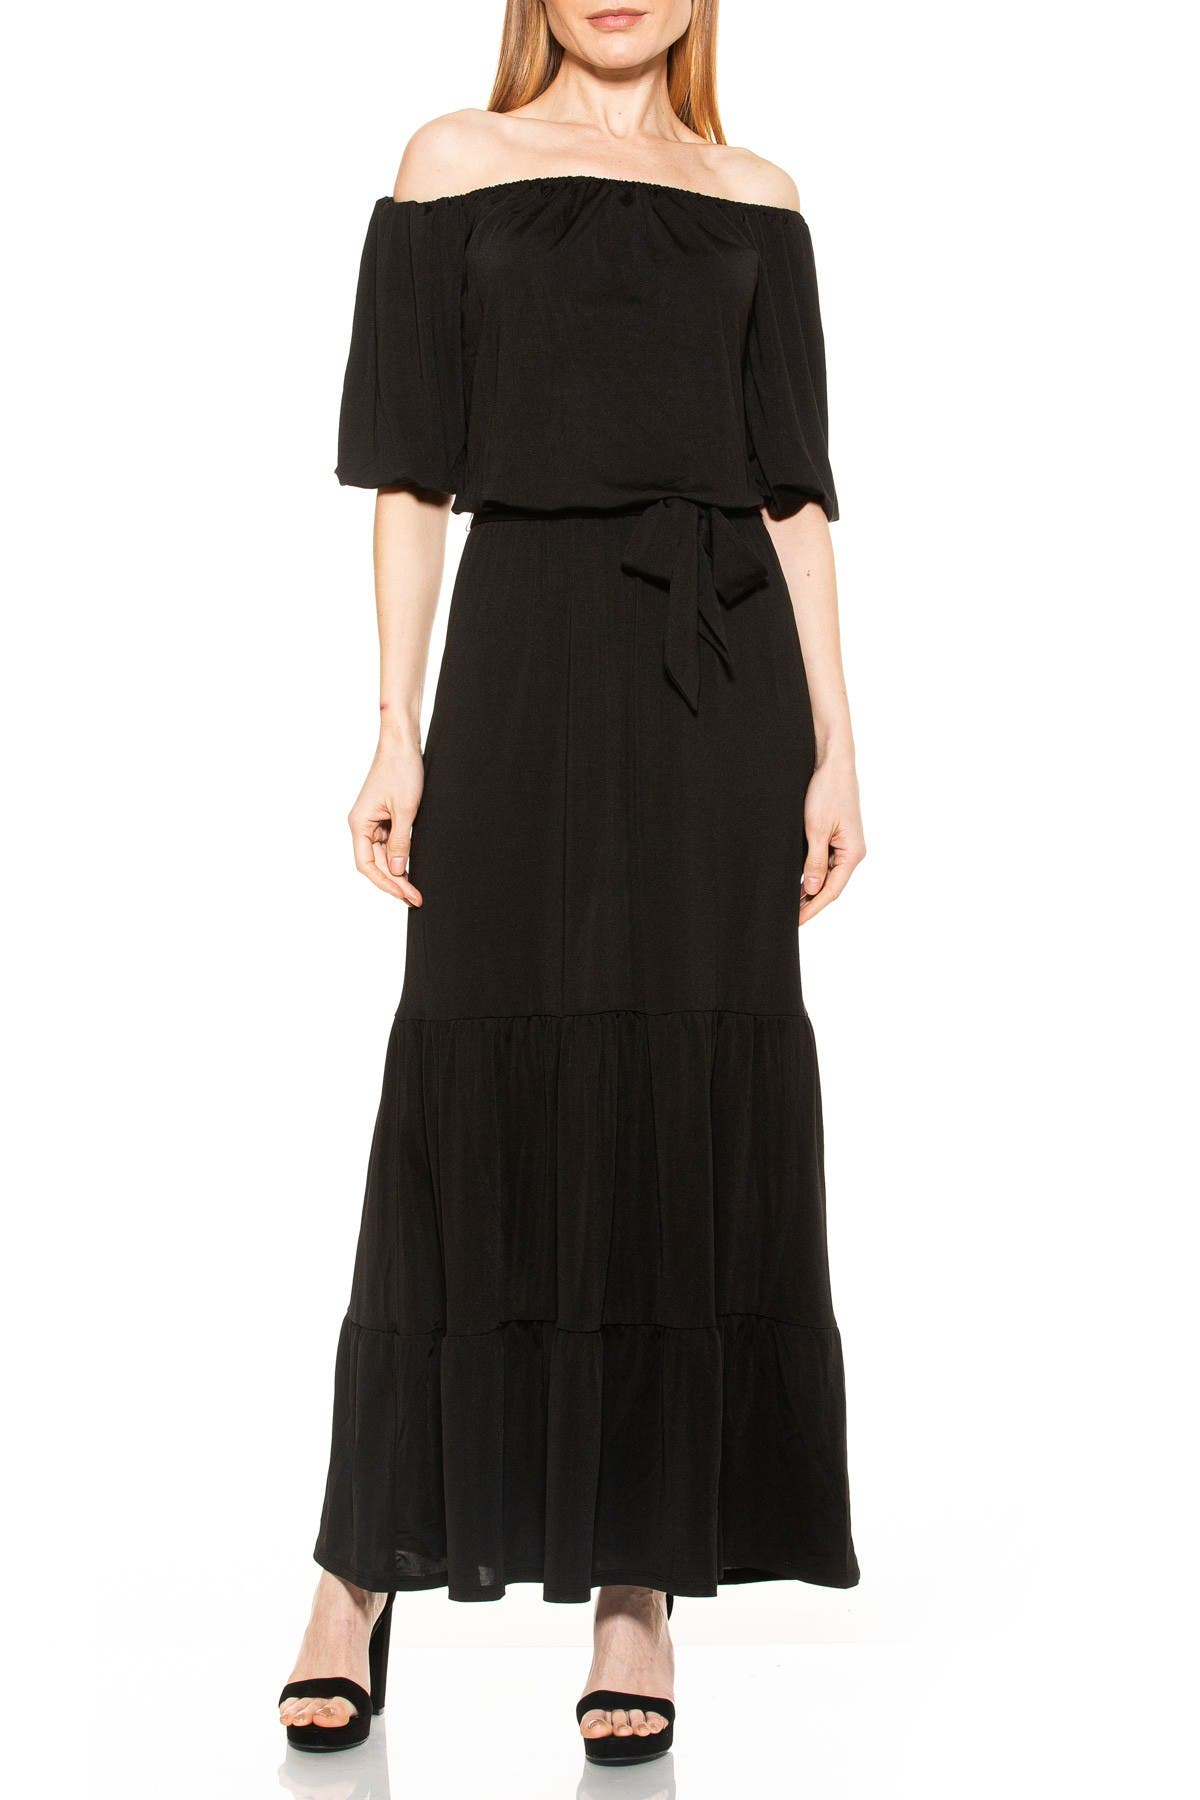 Alexia Admor Calista Off-the-shoulder Tiered Maxi Dress In Black